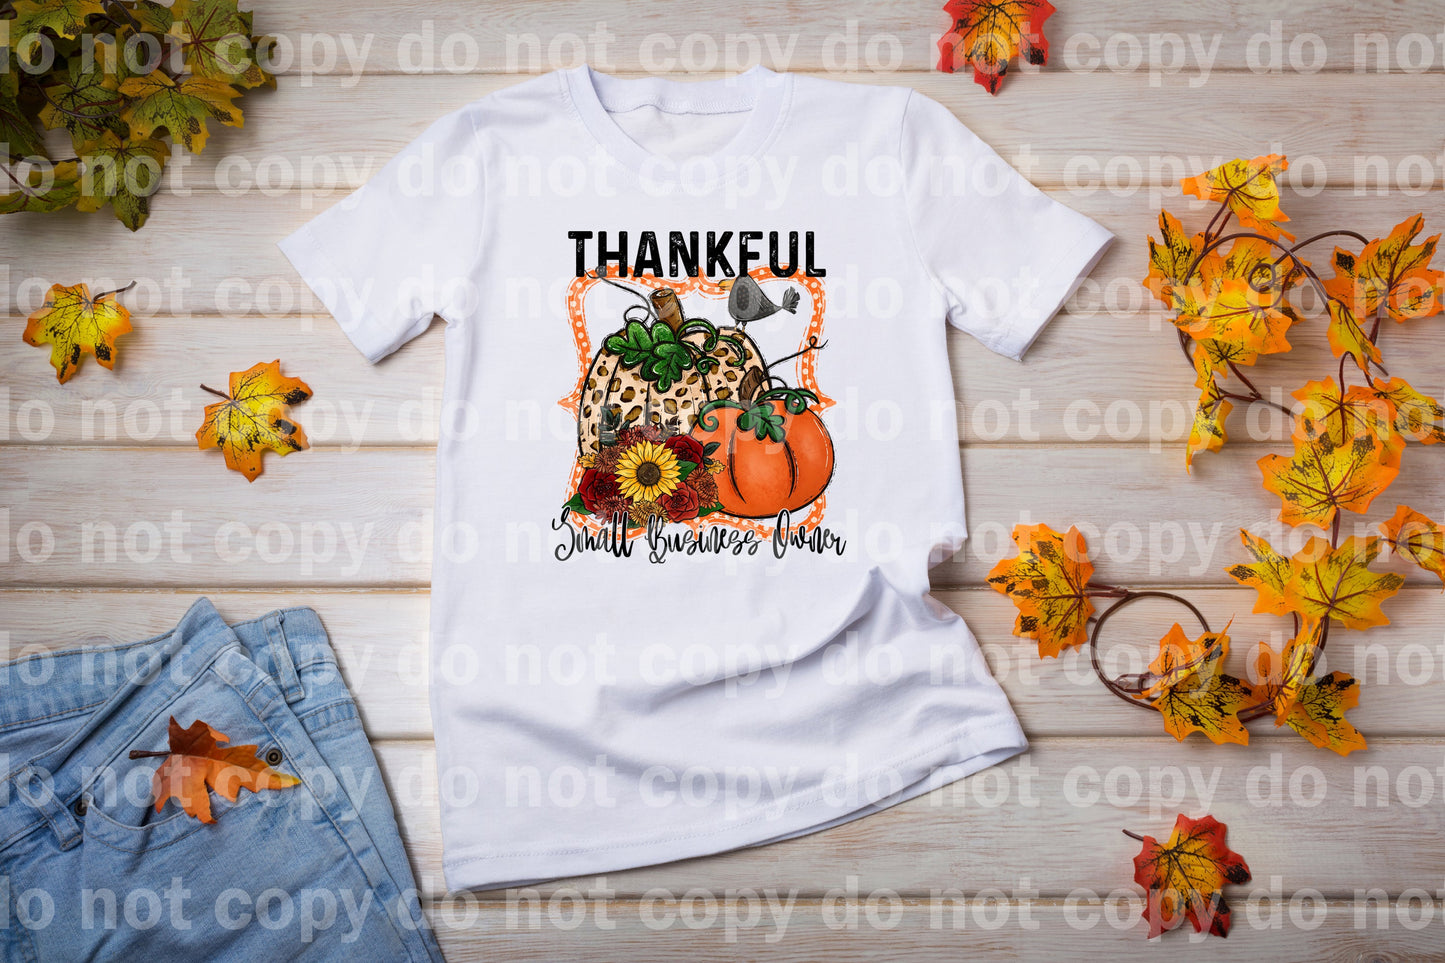 Thankful Small Business Owner Dream Print or Sublimation Print